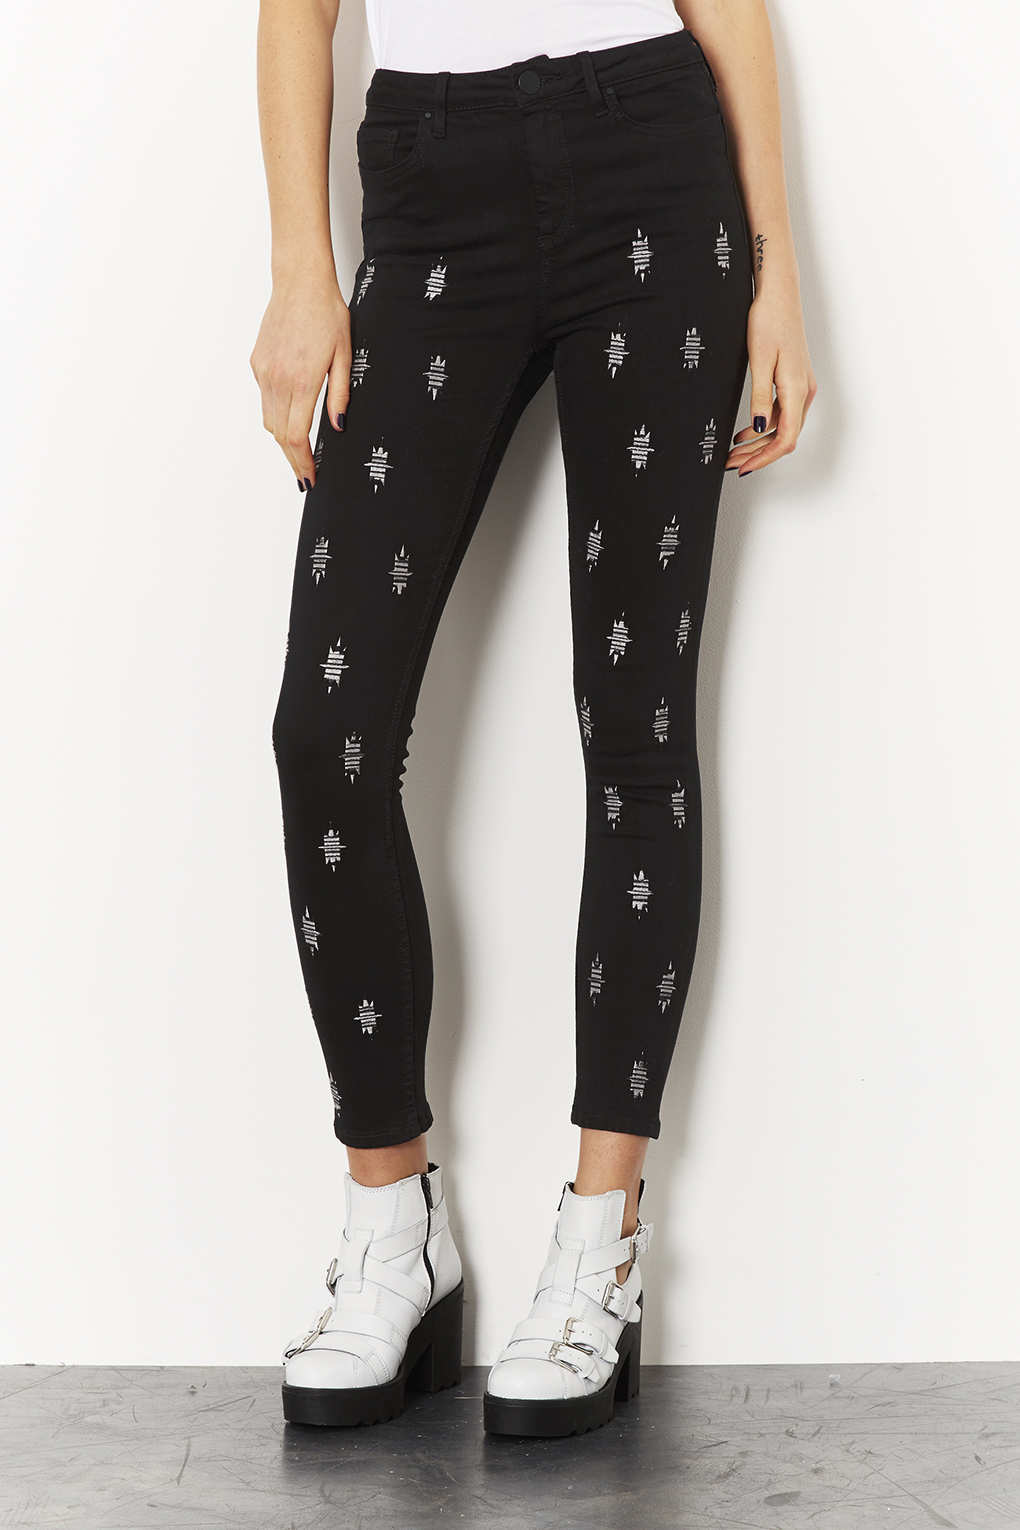 Lyst - Topshop Moto Embroidered Jamie Jeans in Black